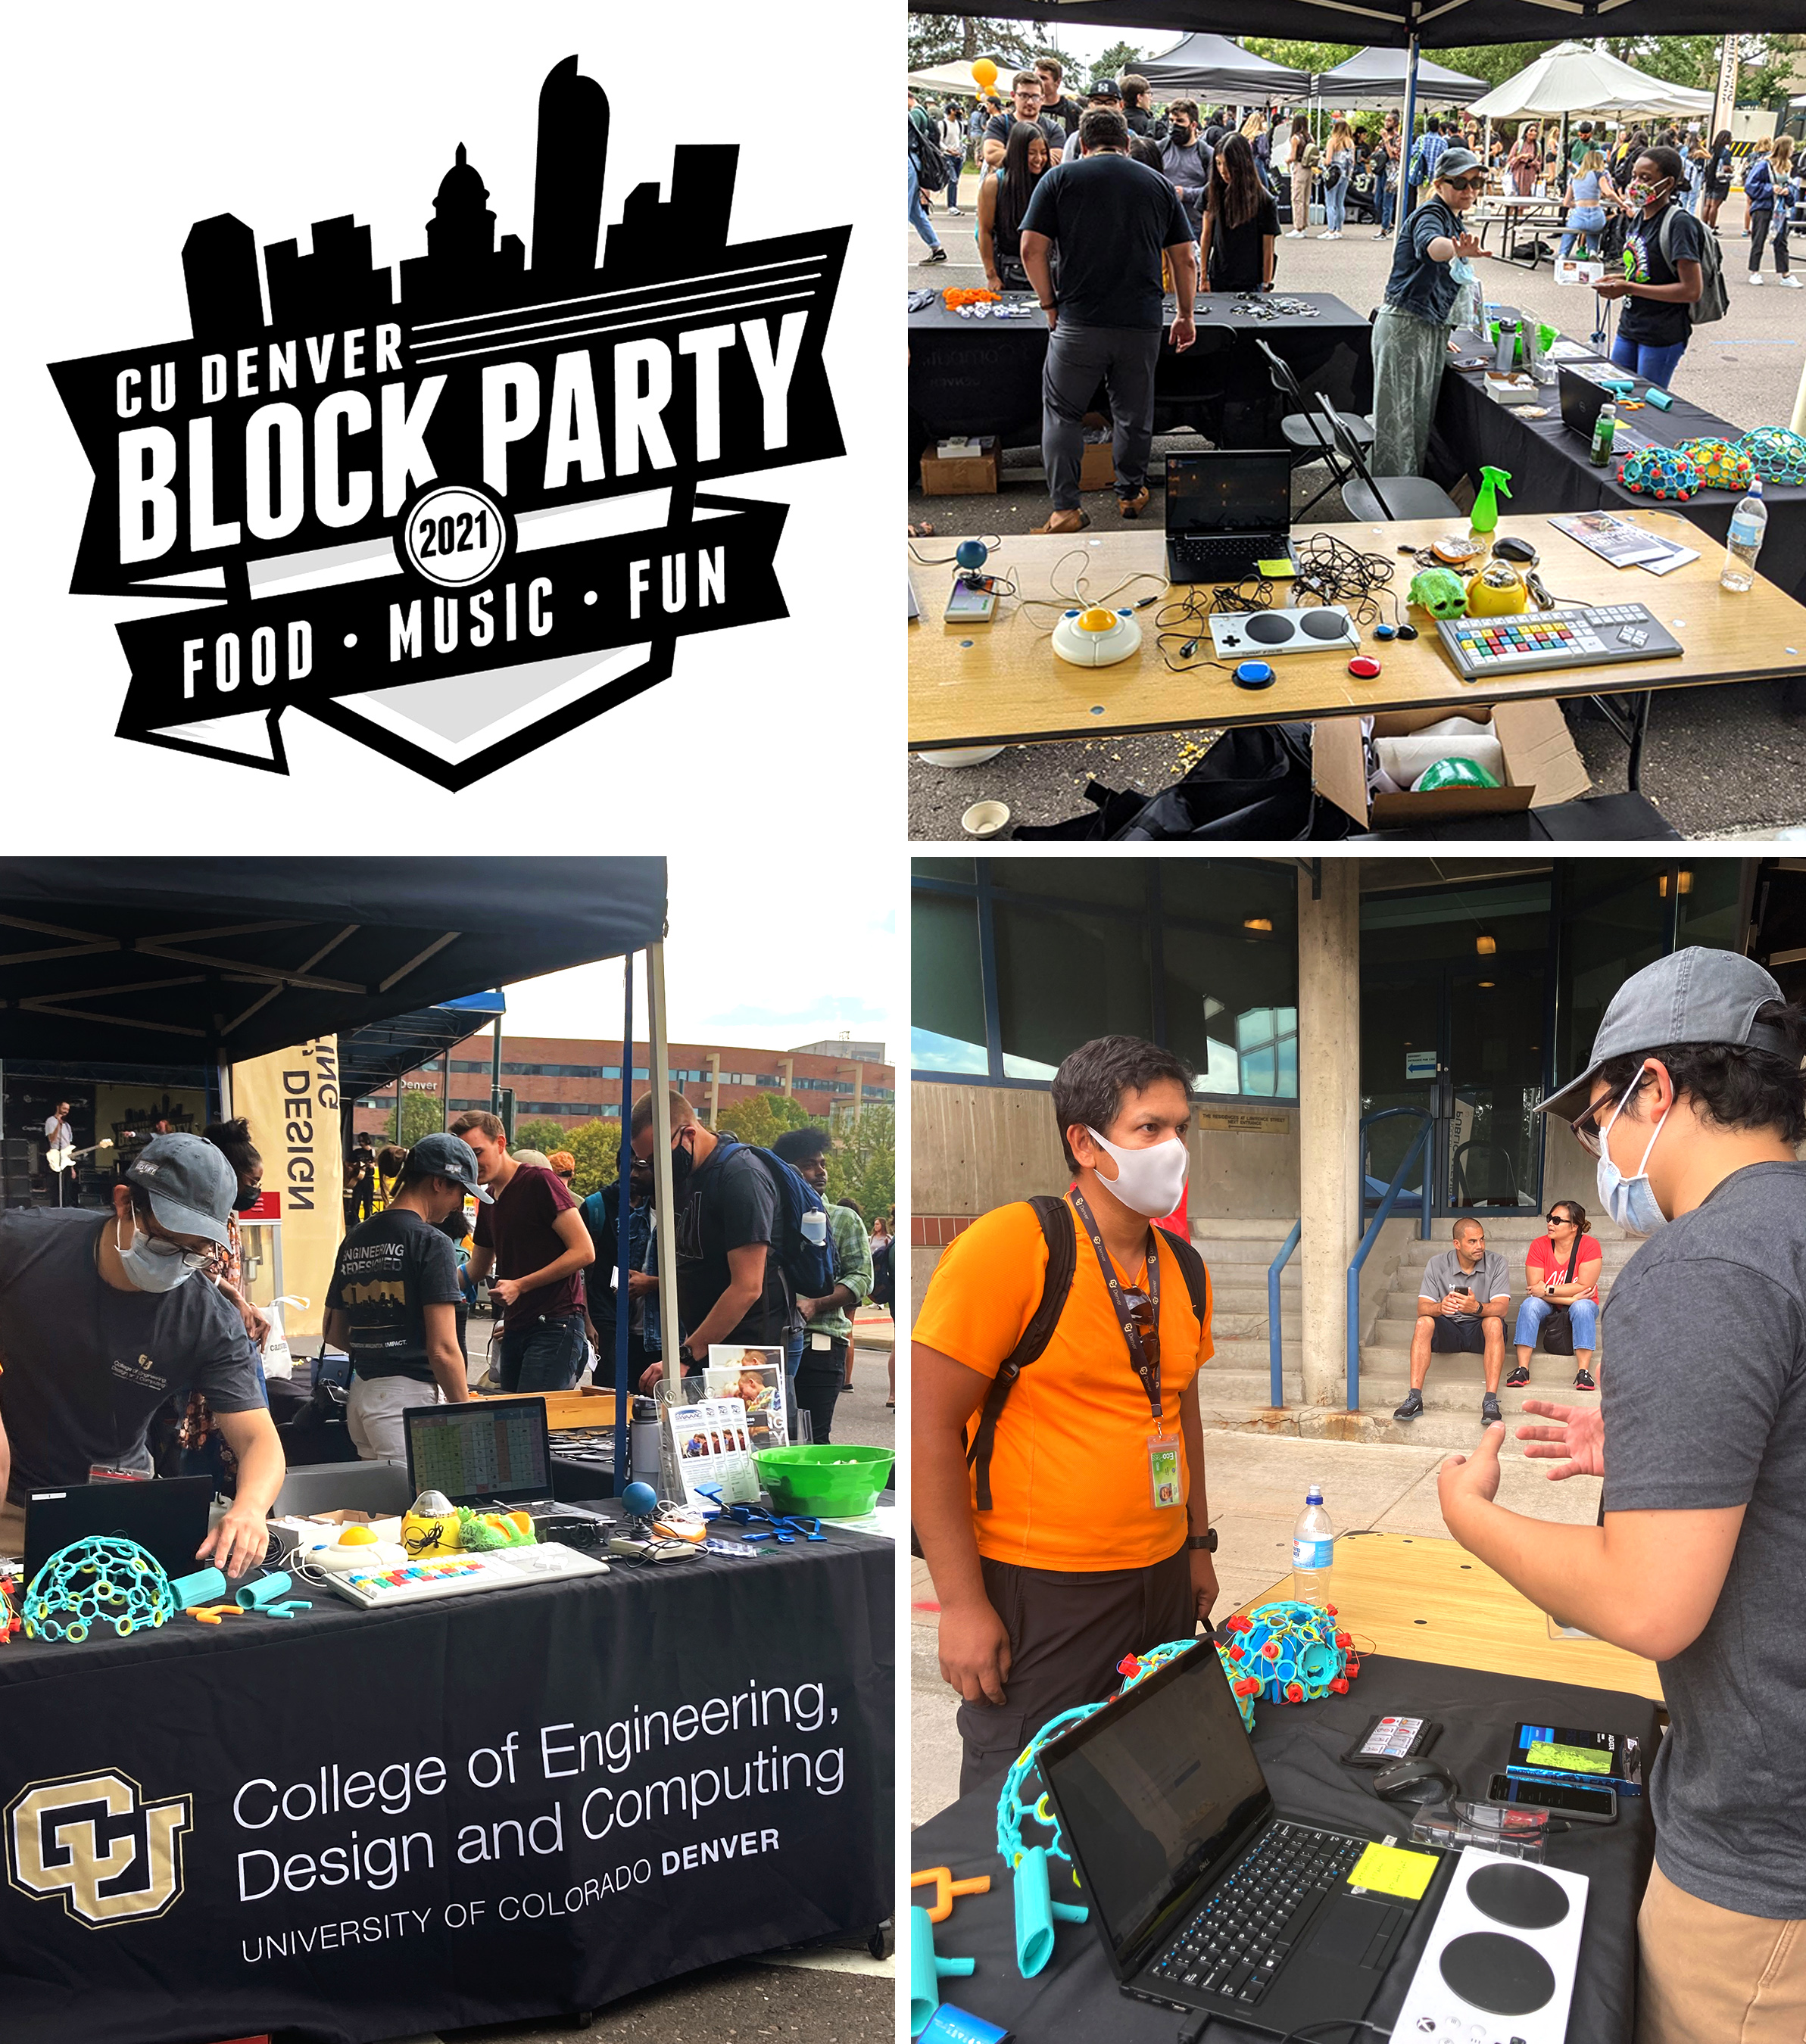 An image of the CIDE table at the 2021 CU Denver Block Party